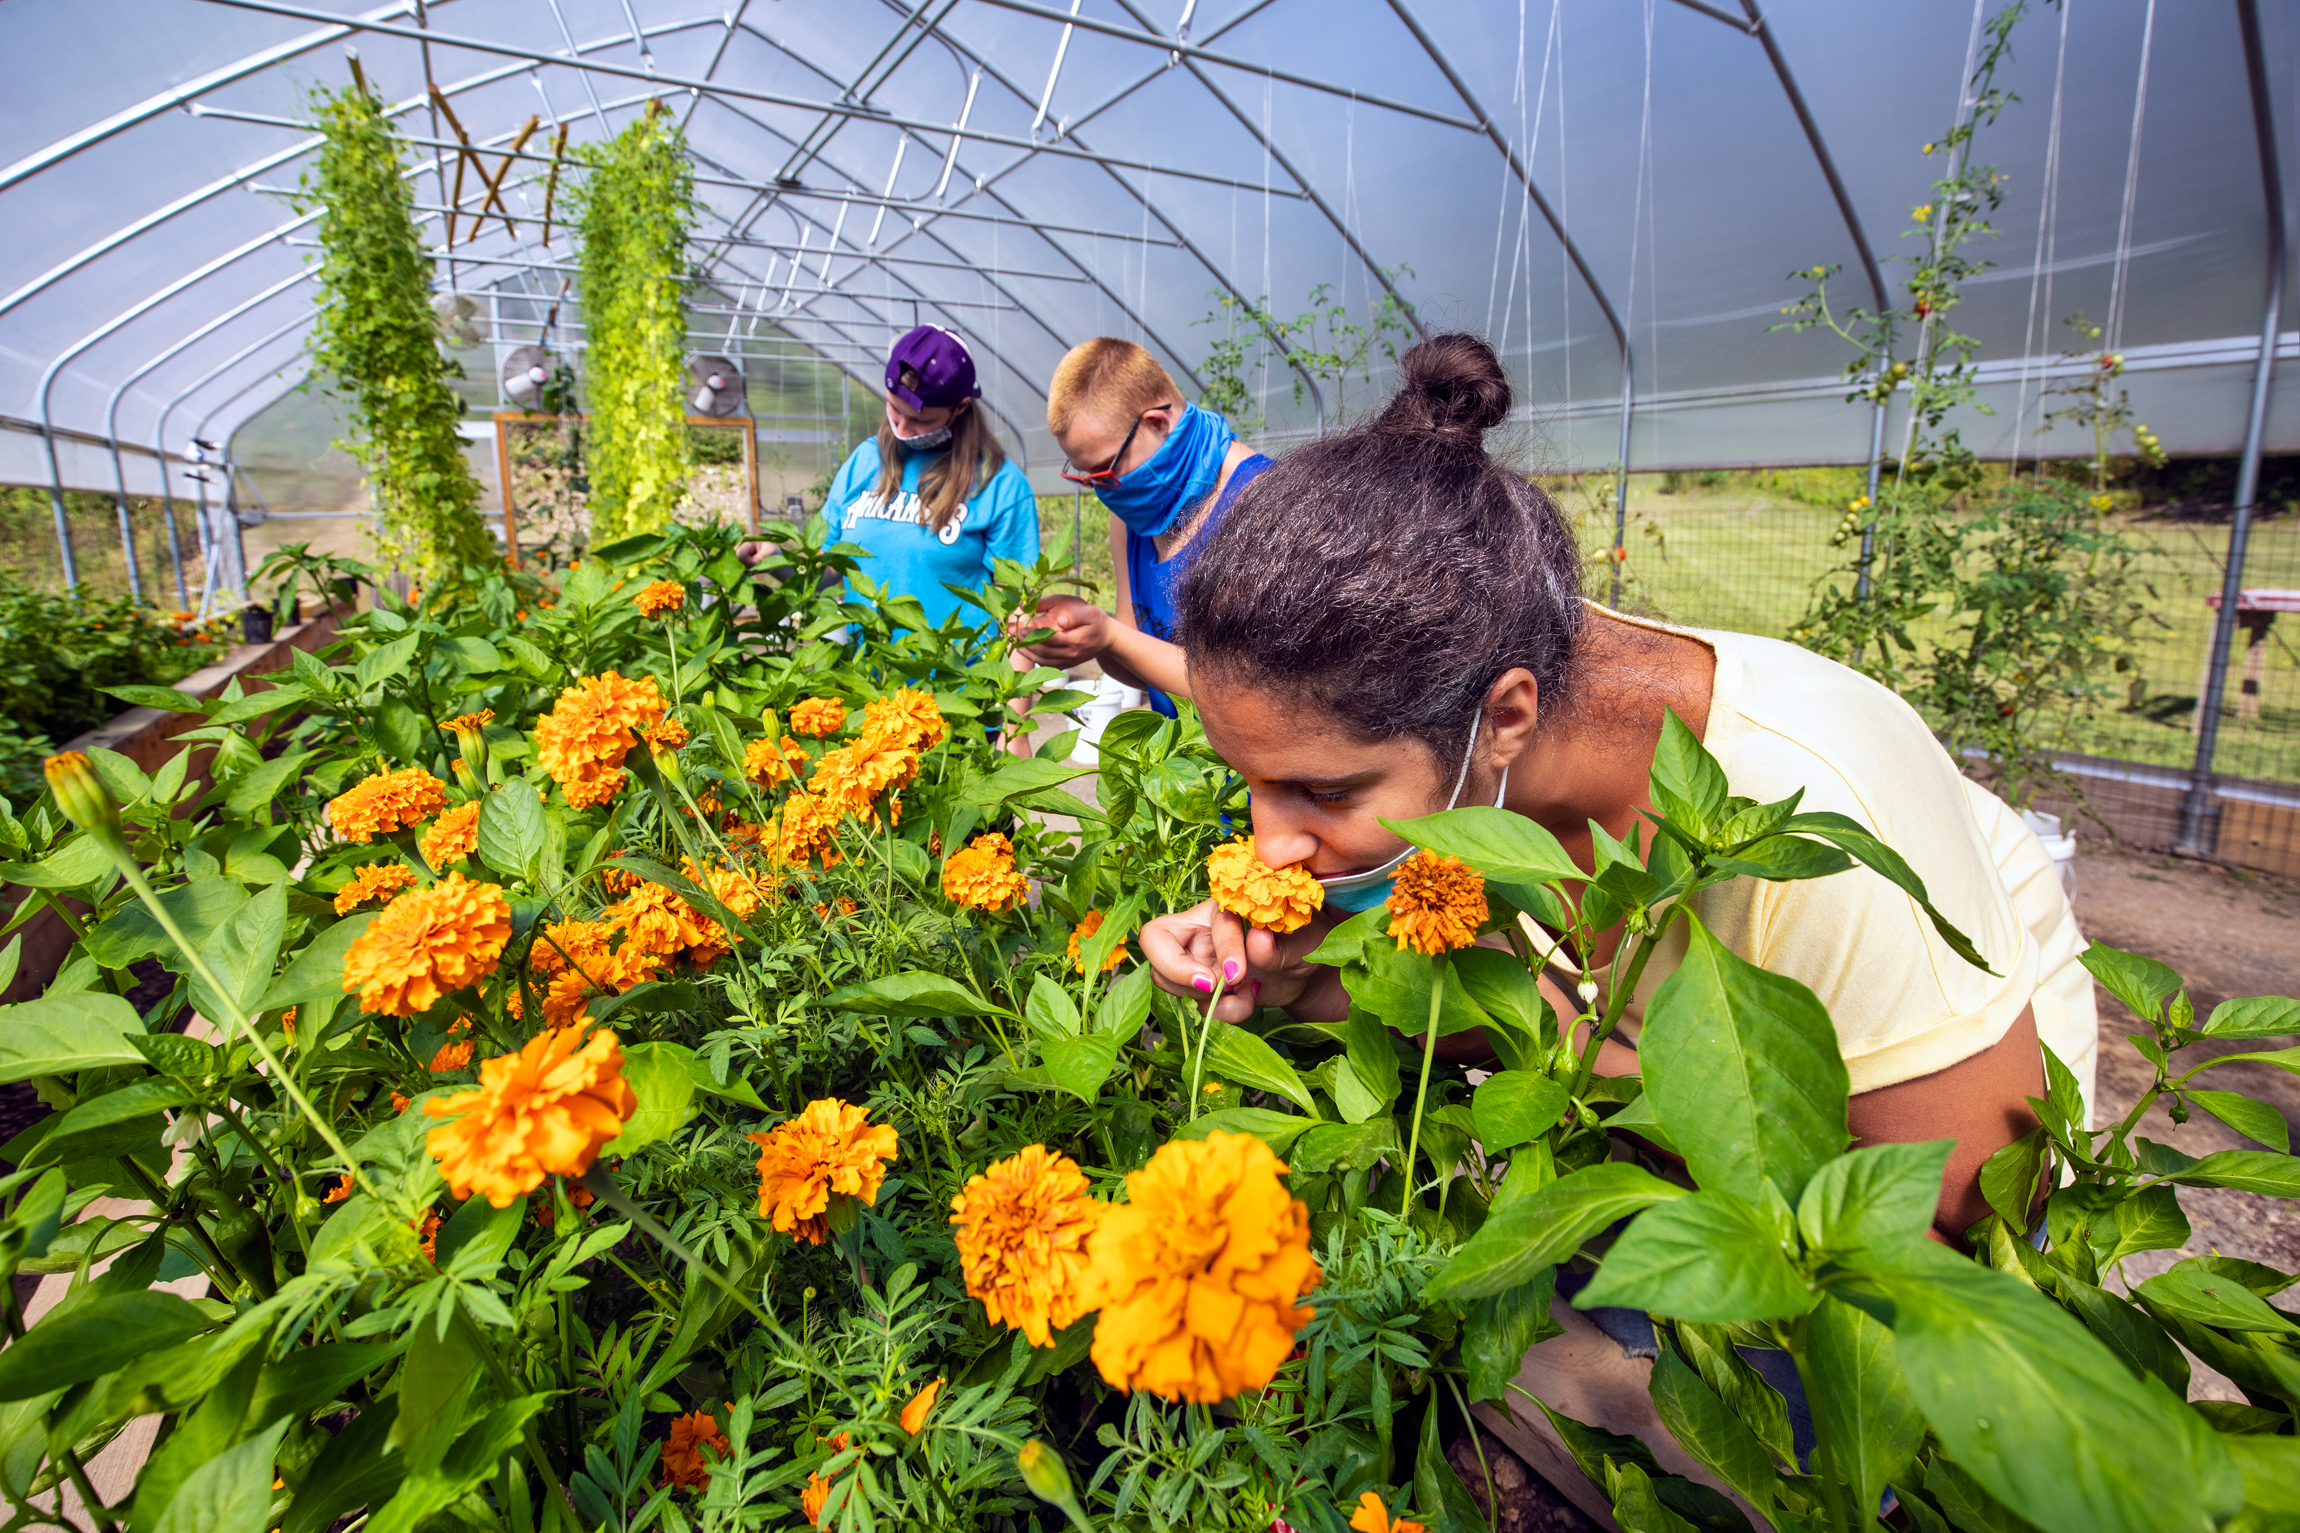 Taking time to smell the marigolds is part of the recreational farm programming.